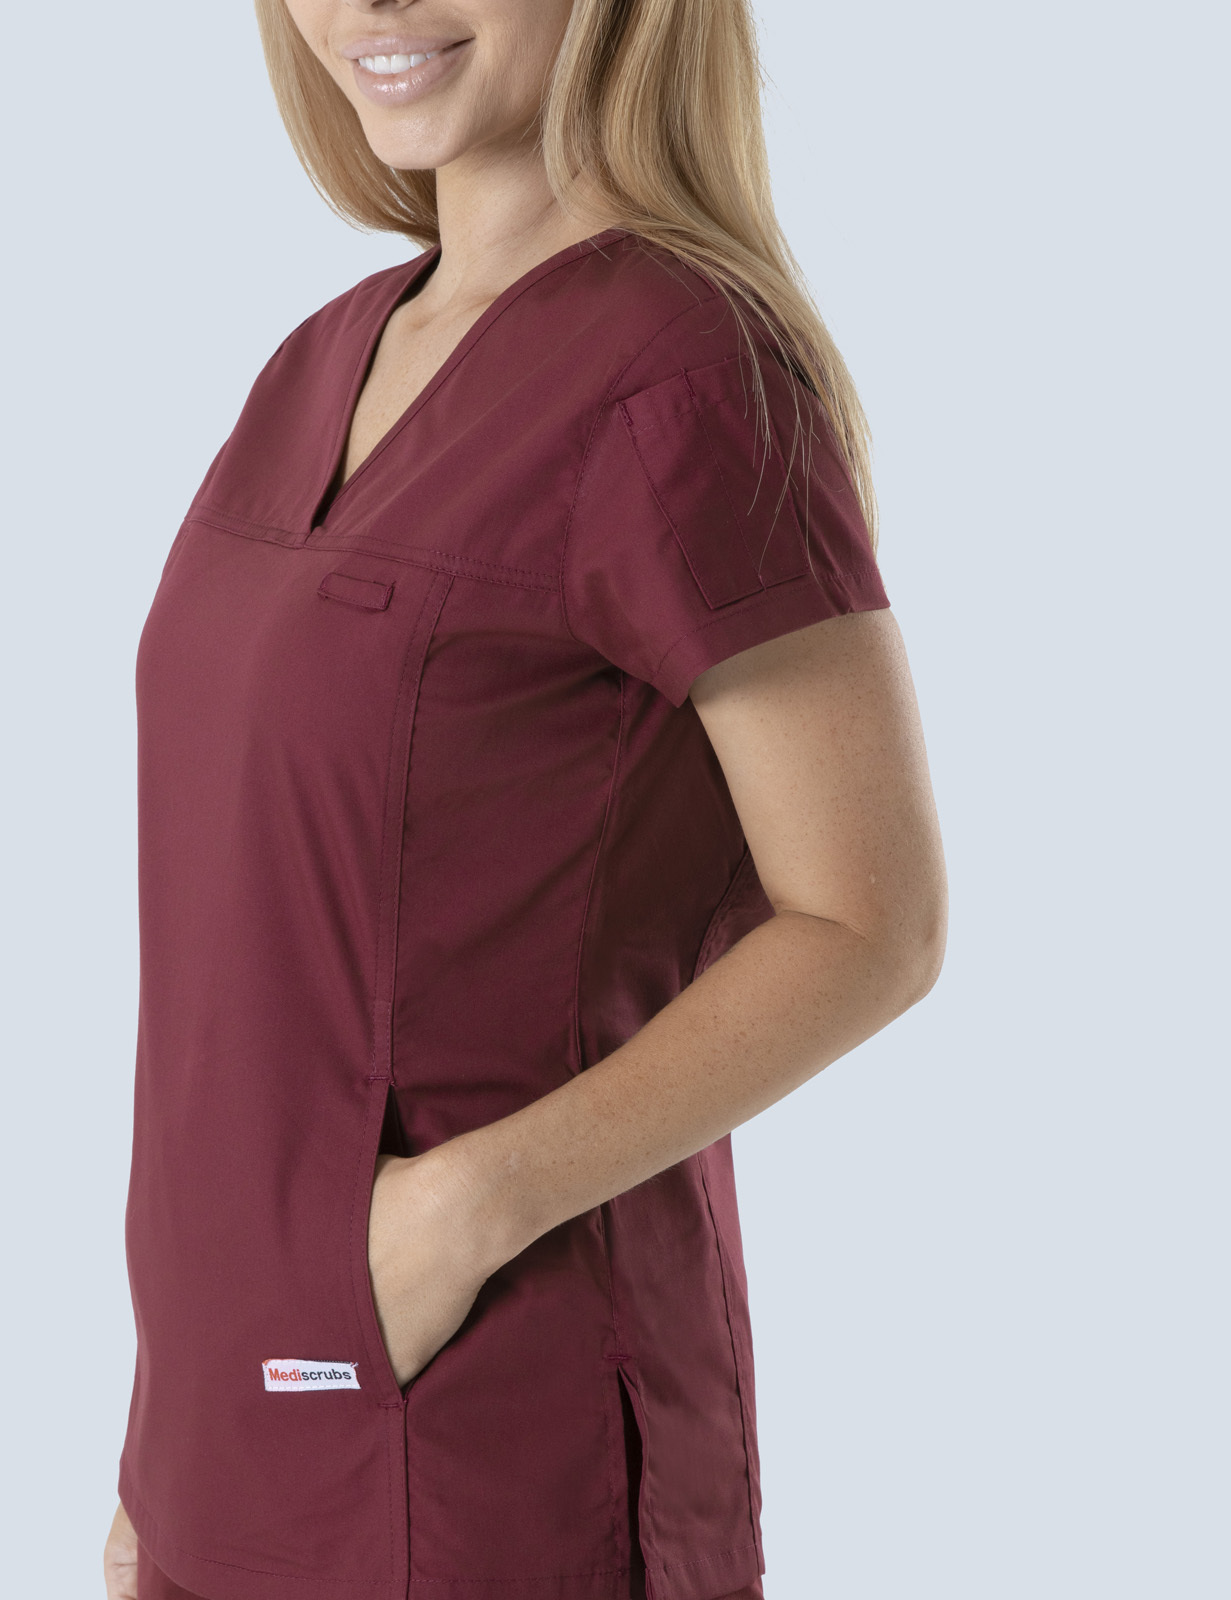 Women's Fit Solid Scrub Top - Burgundy - Small - 0